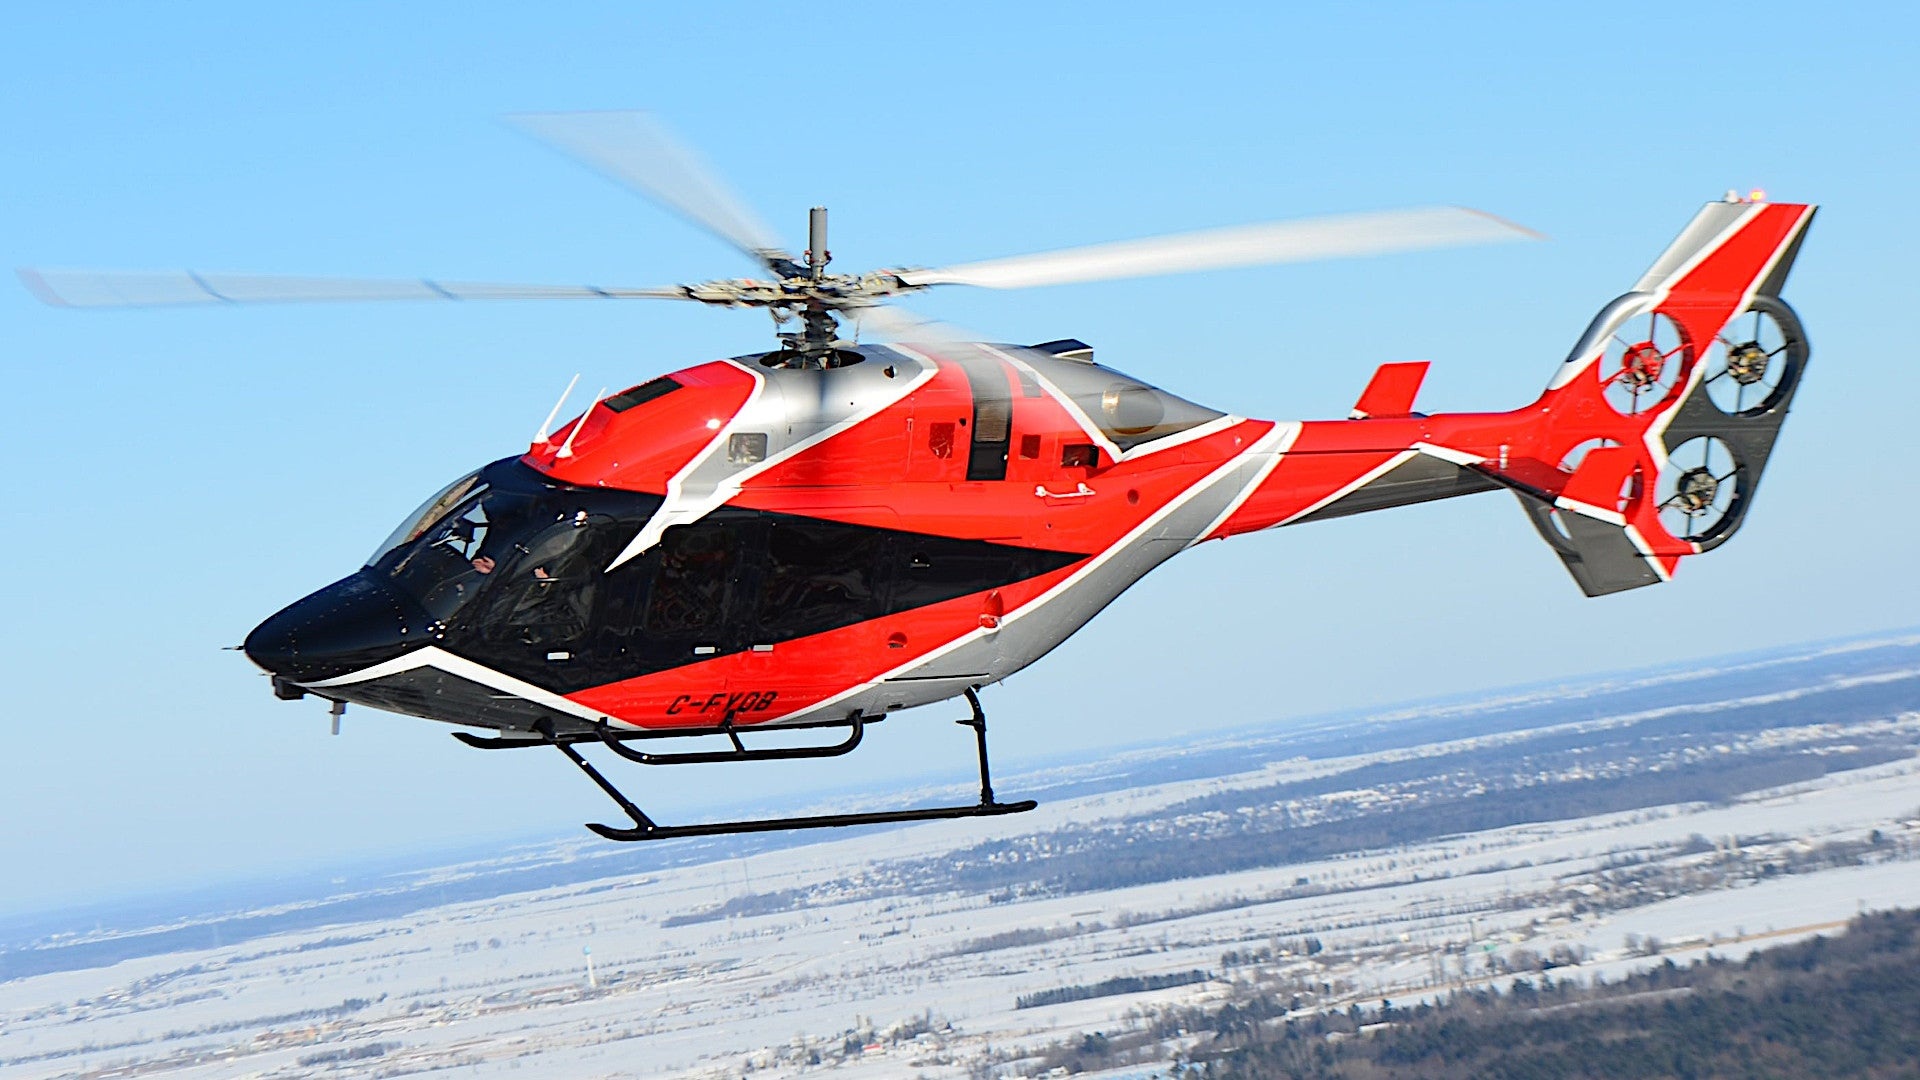 Bell's new electrically powered helicopter, Game-changing innovation, Future of aviation, Enhanced performance, 1920x1080 Full HD Desktop